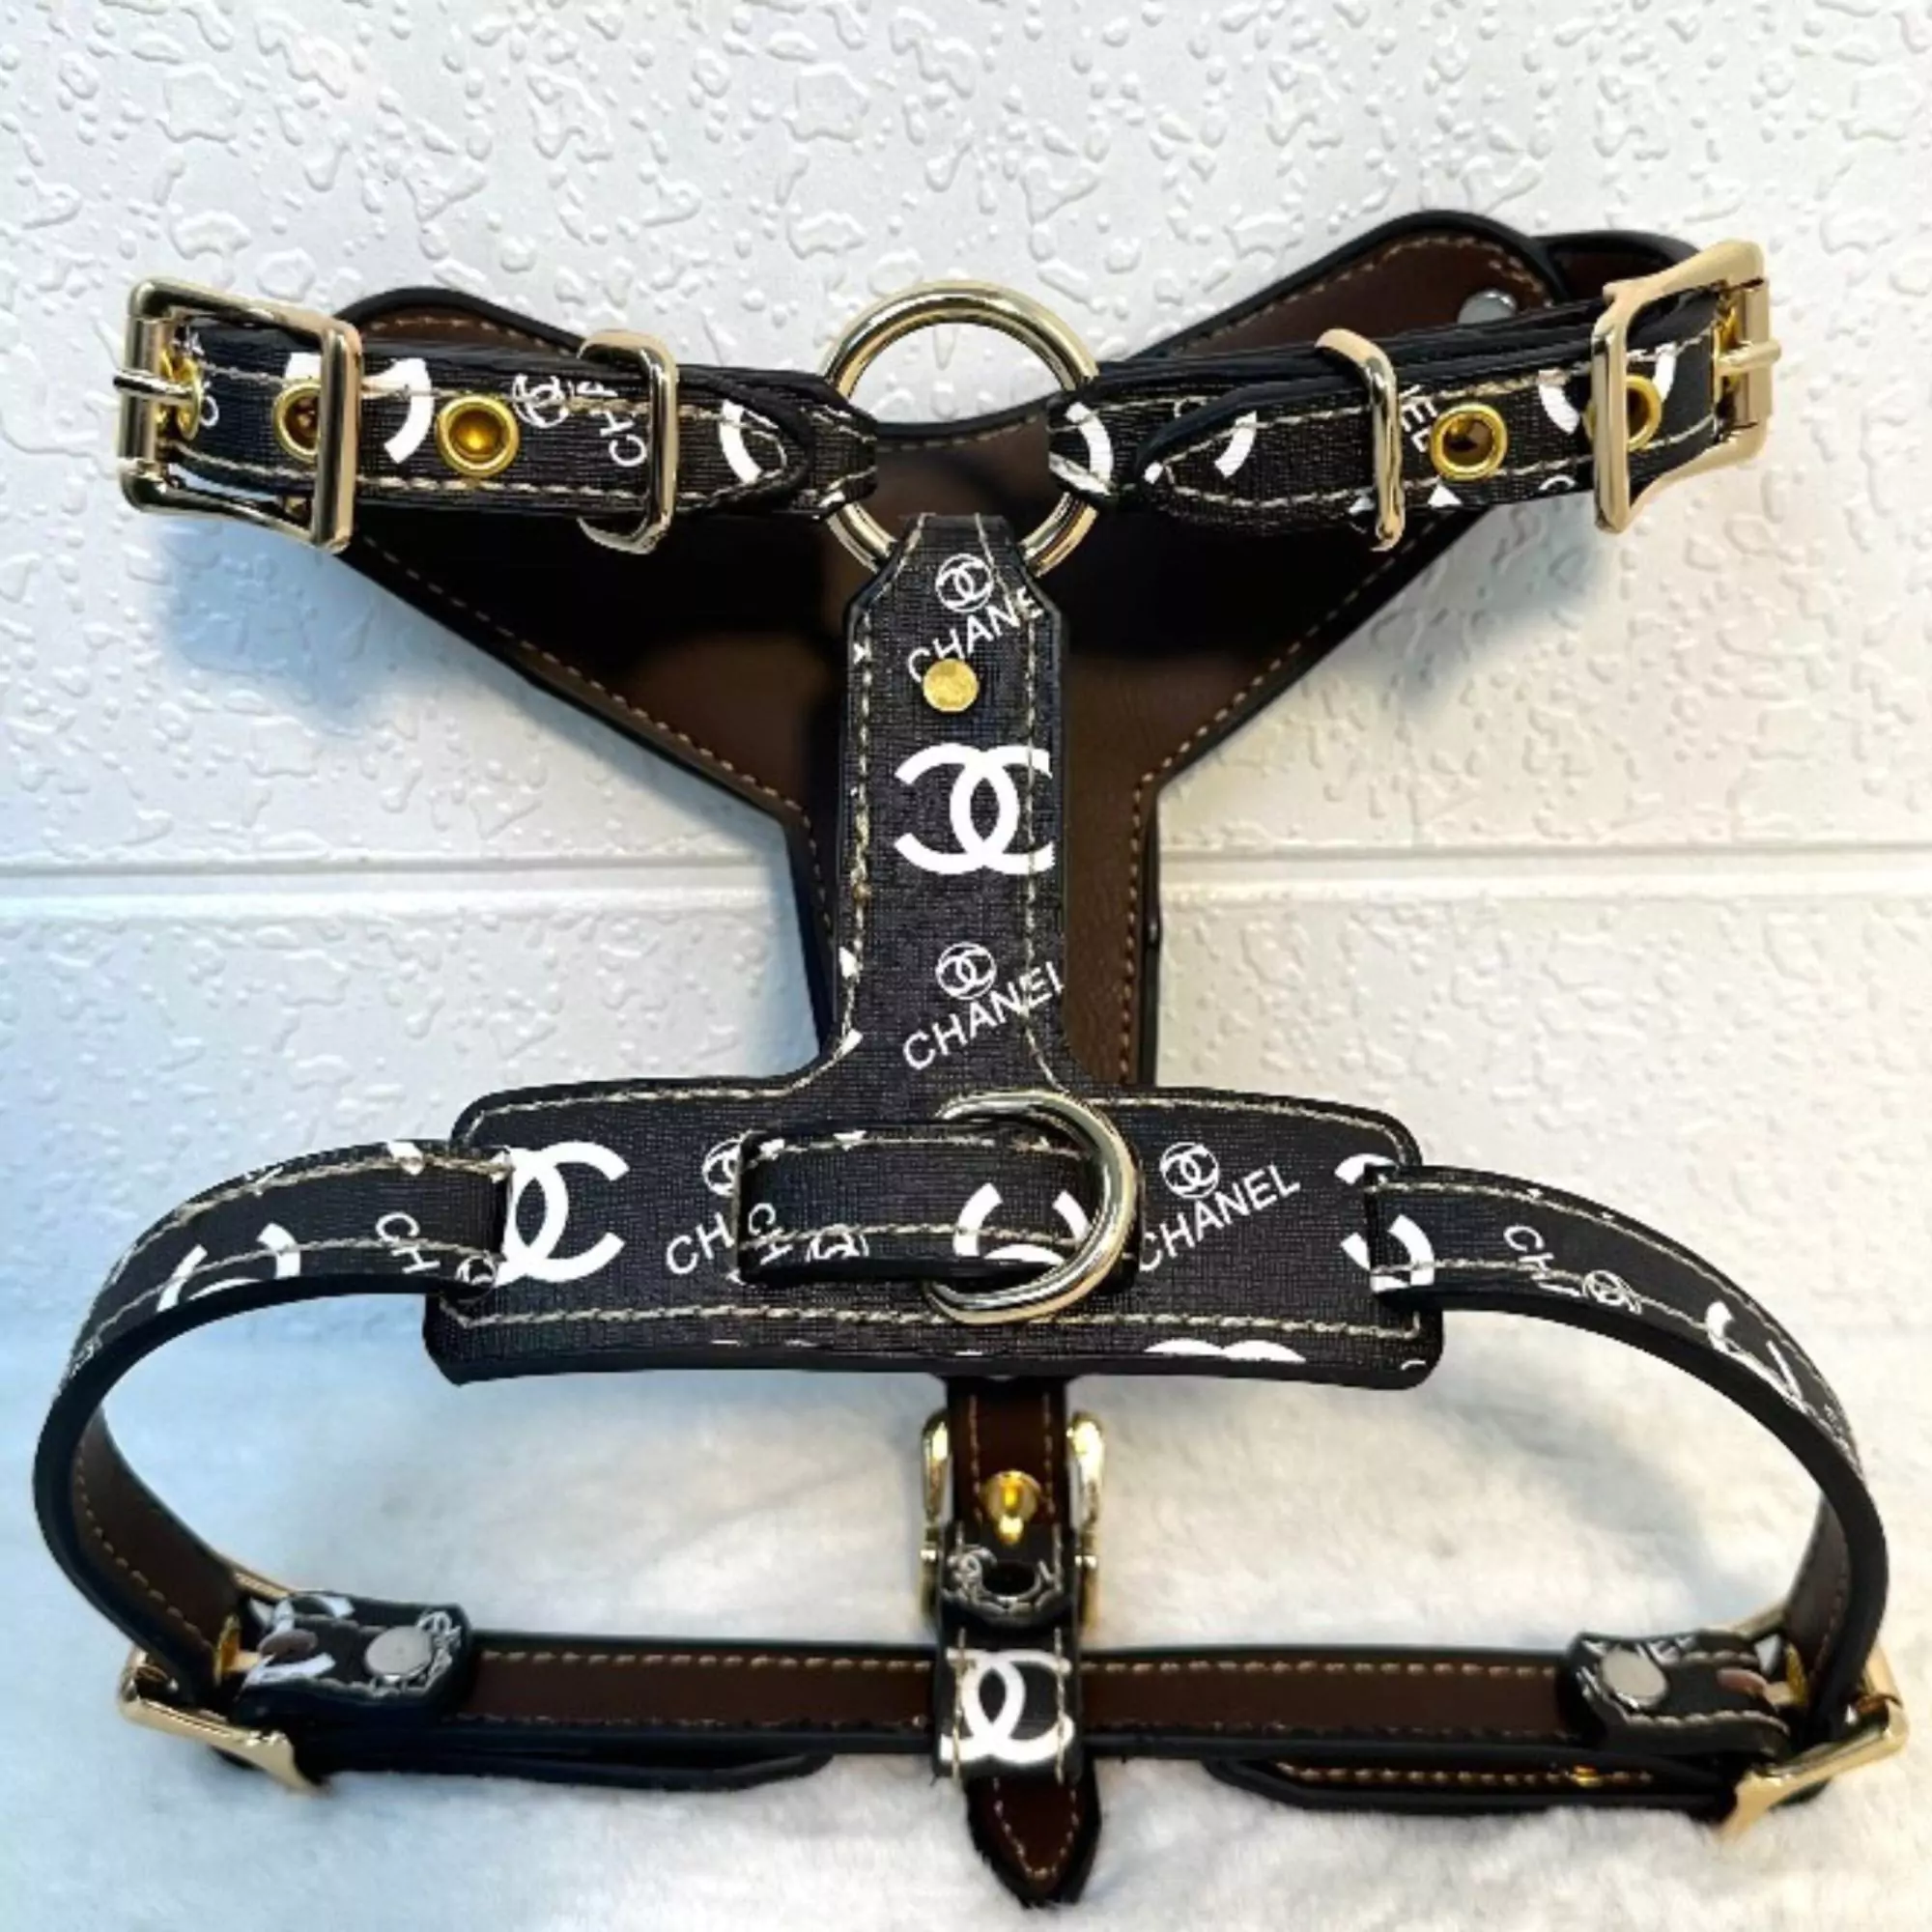 Opulent Elegance: Black Chanel Harness for Dogs with White Logo and Gold Hardware1